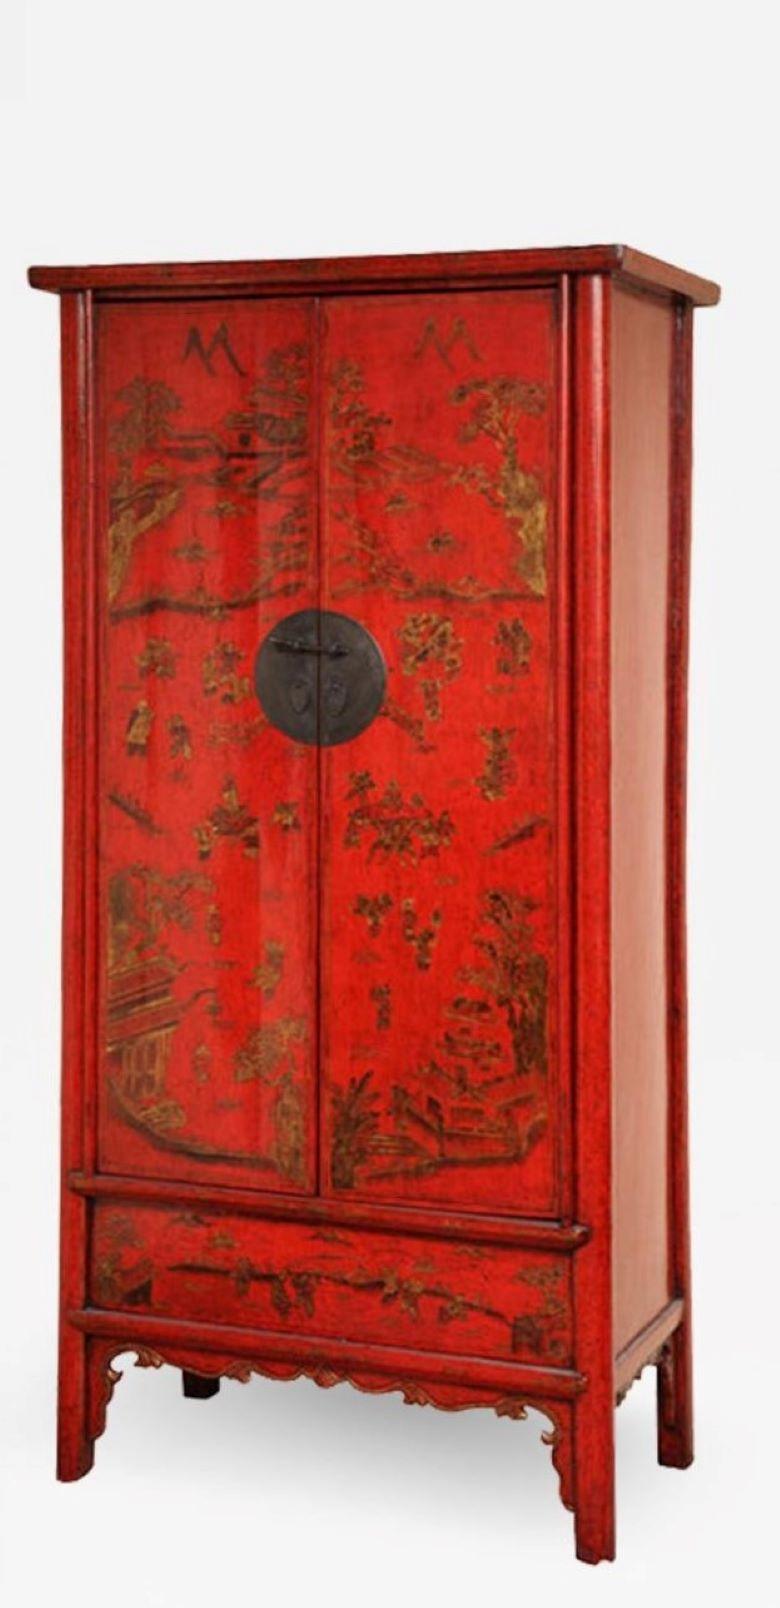 Very Attractive 19th century Red Lacquered Chinese Two Door Cabinets with Chinoiserie Decoration. Fitted Interior with Shelf, Two Drawers and Concealed Compartment. This important piece will add color and height to an decor.